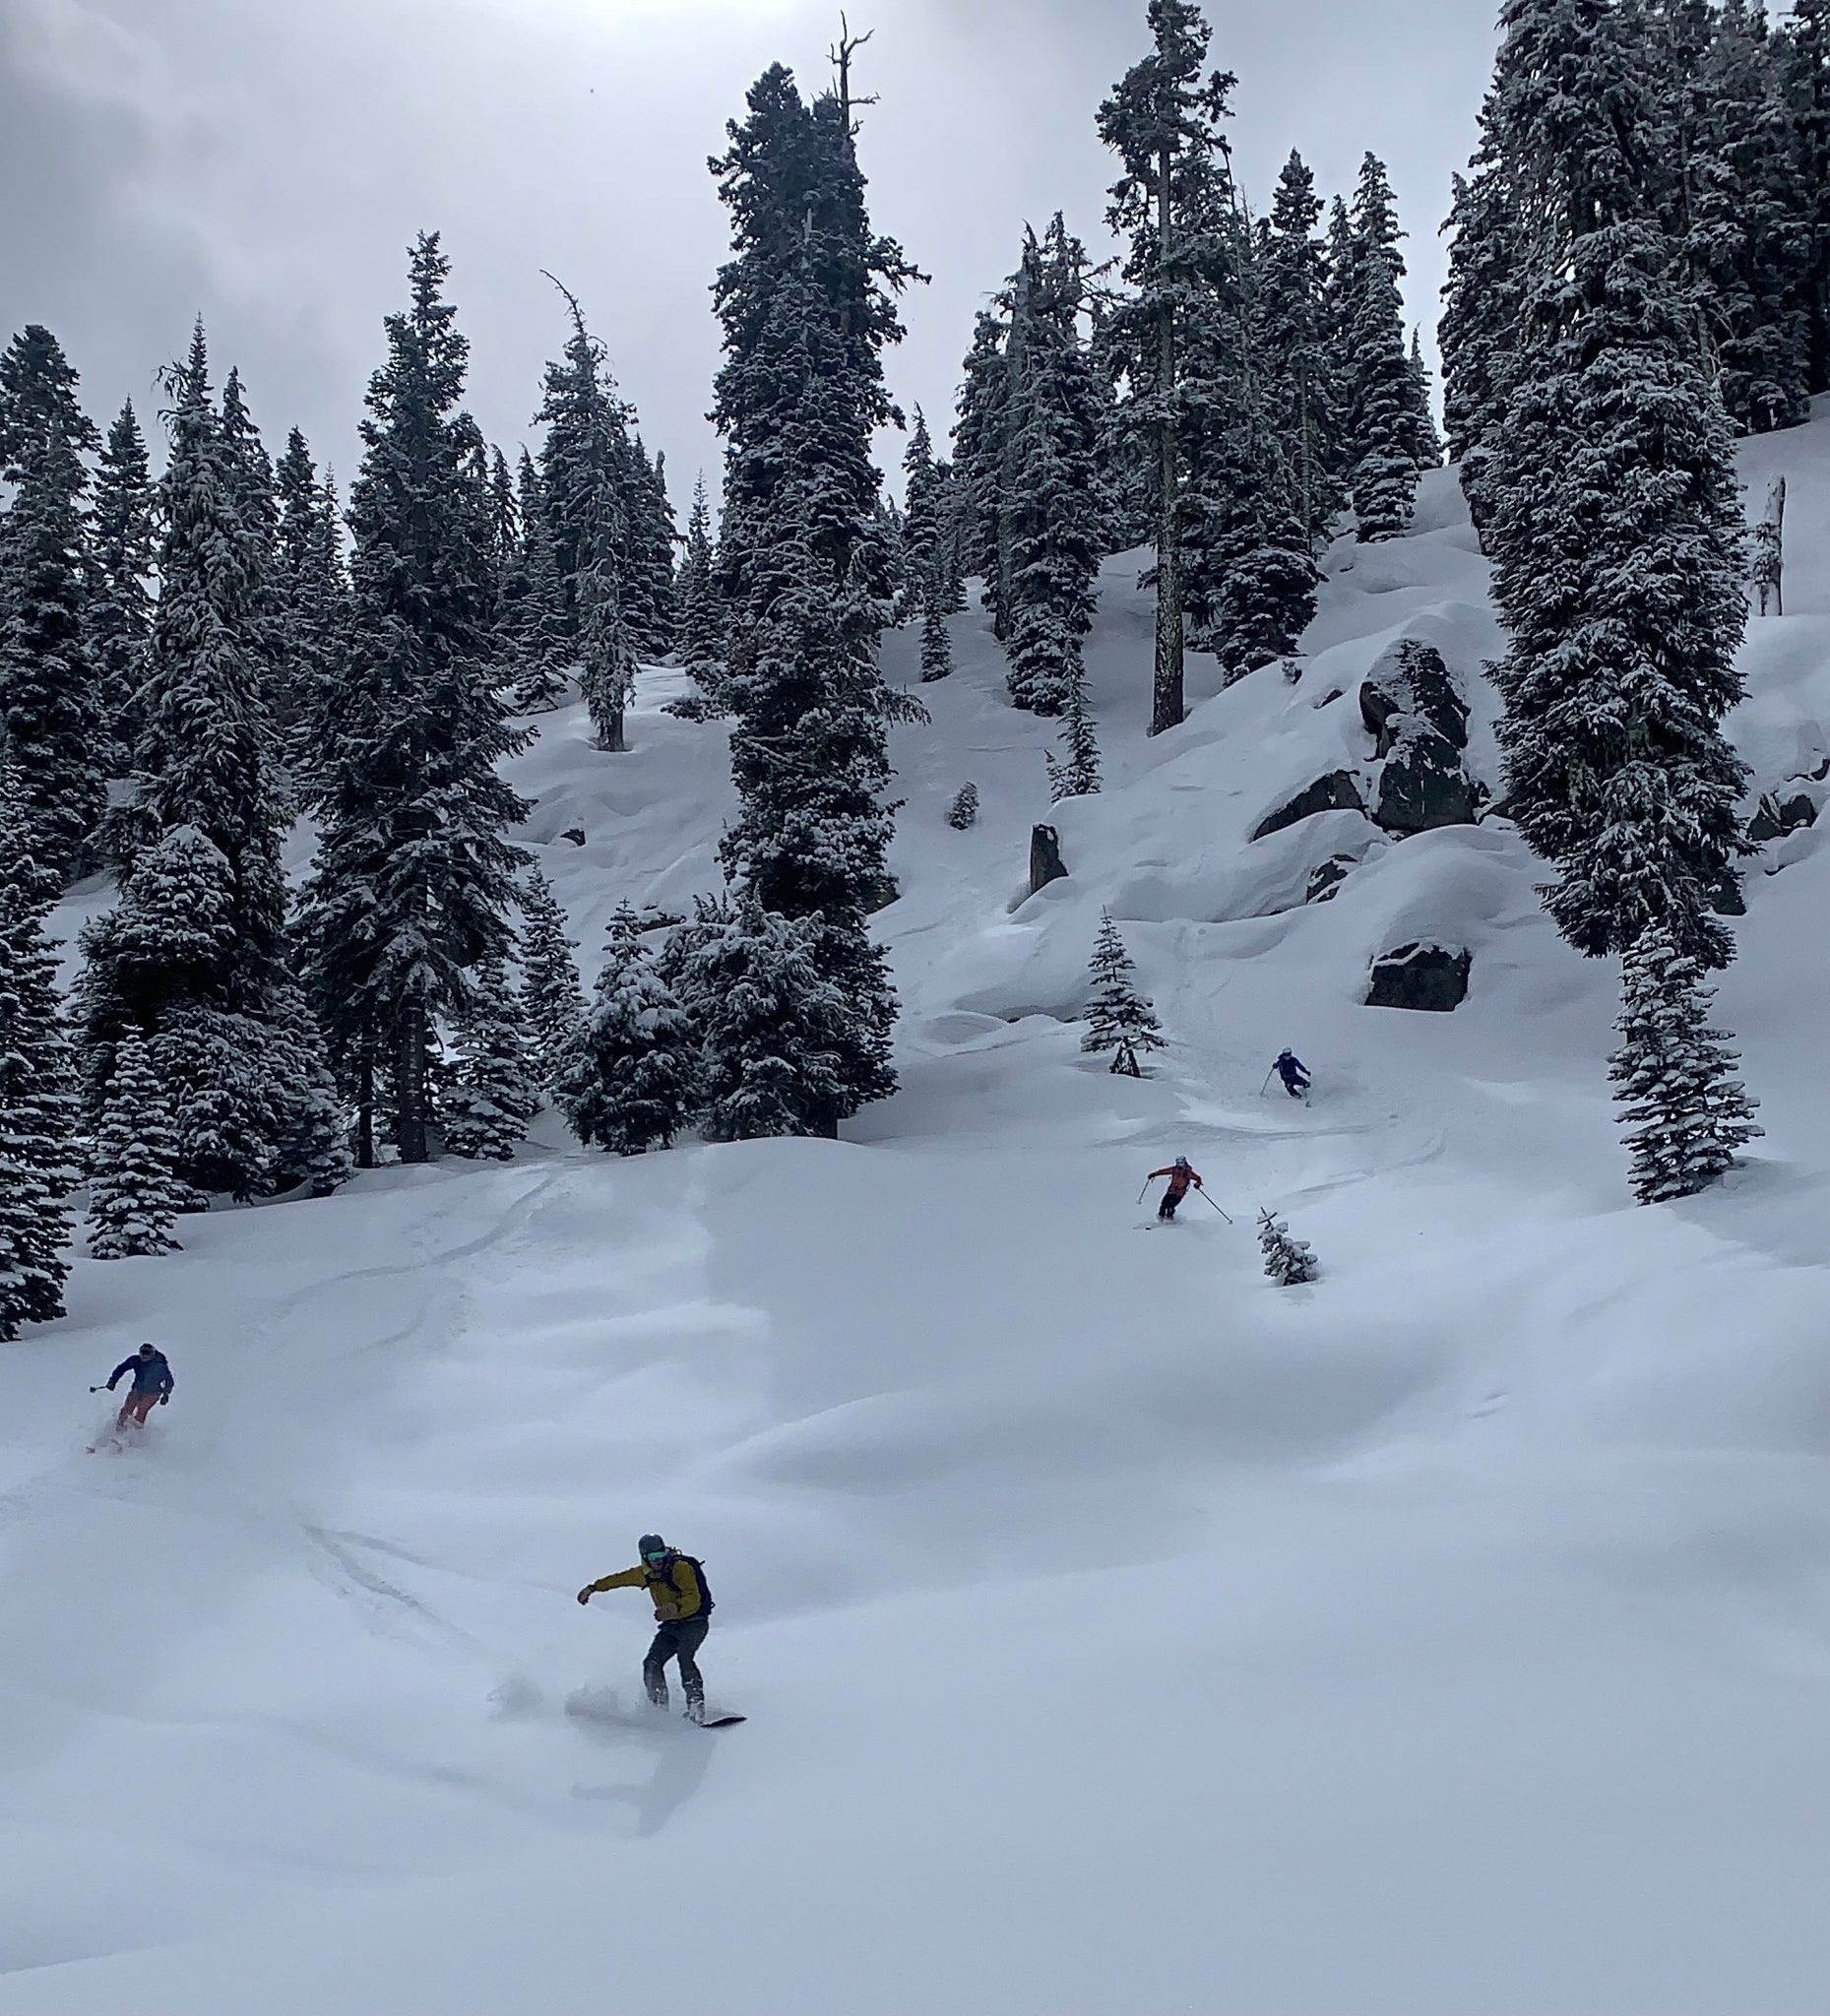 Backcountry skiing and splitboarding fresh snow at the Frog Lake Huts in Truckee, California